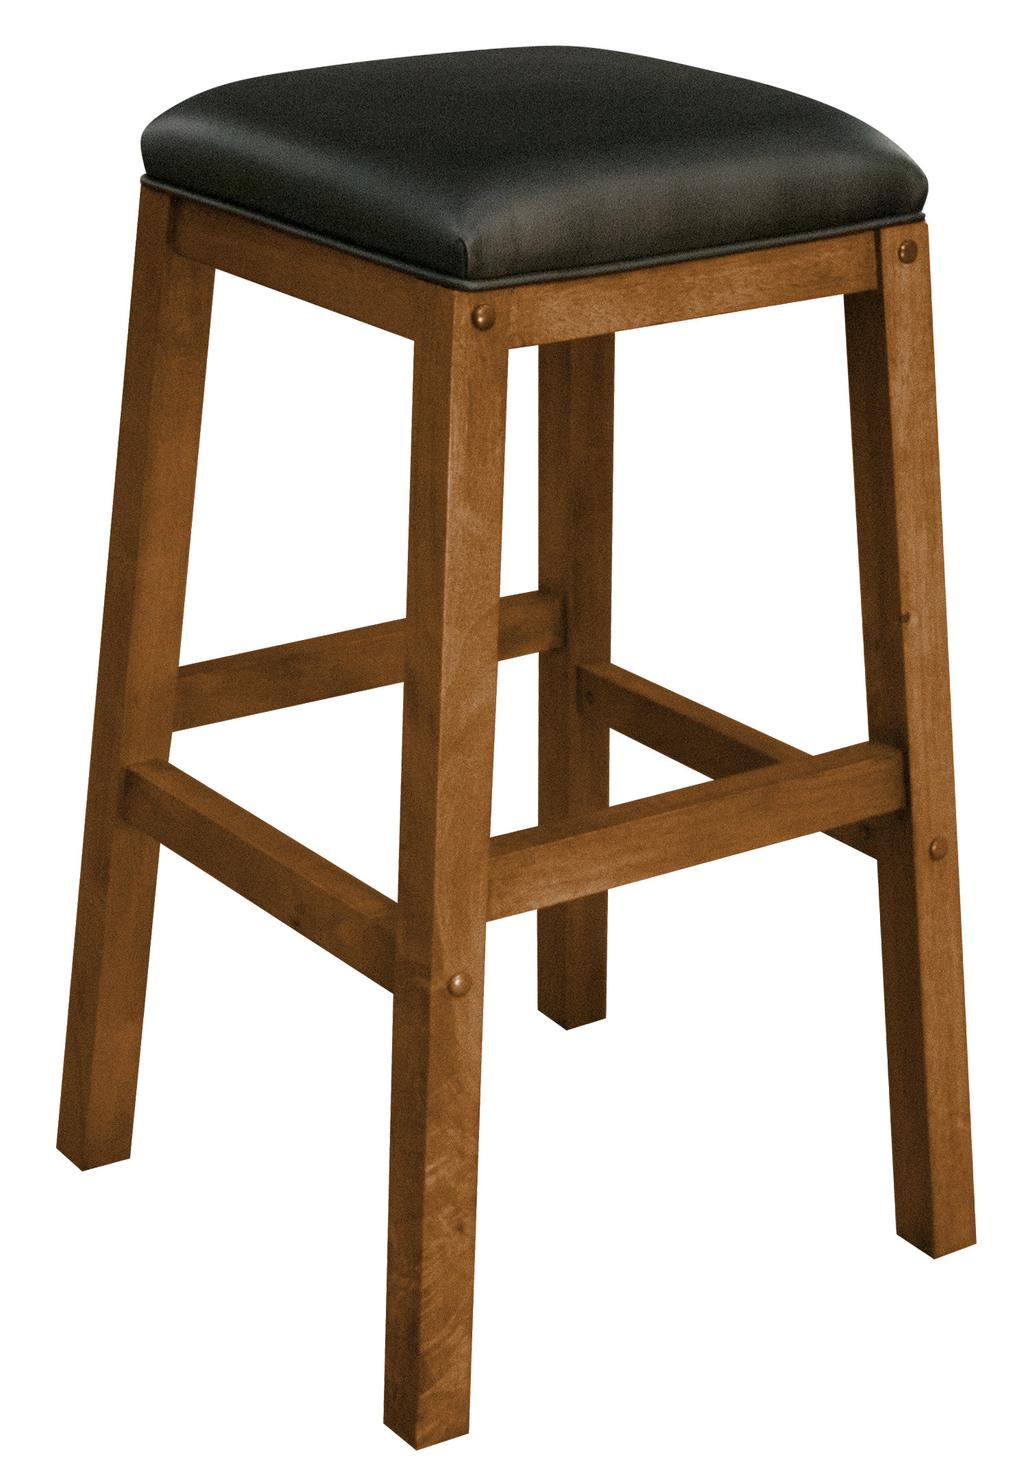 BACKLESS STOOL With its sturdy base and solid construction, this backless stool from Heritage is a great addition to your bar area, pub table, game set or seating around your